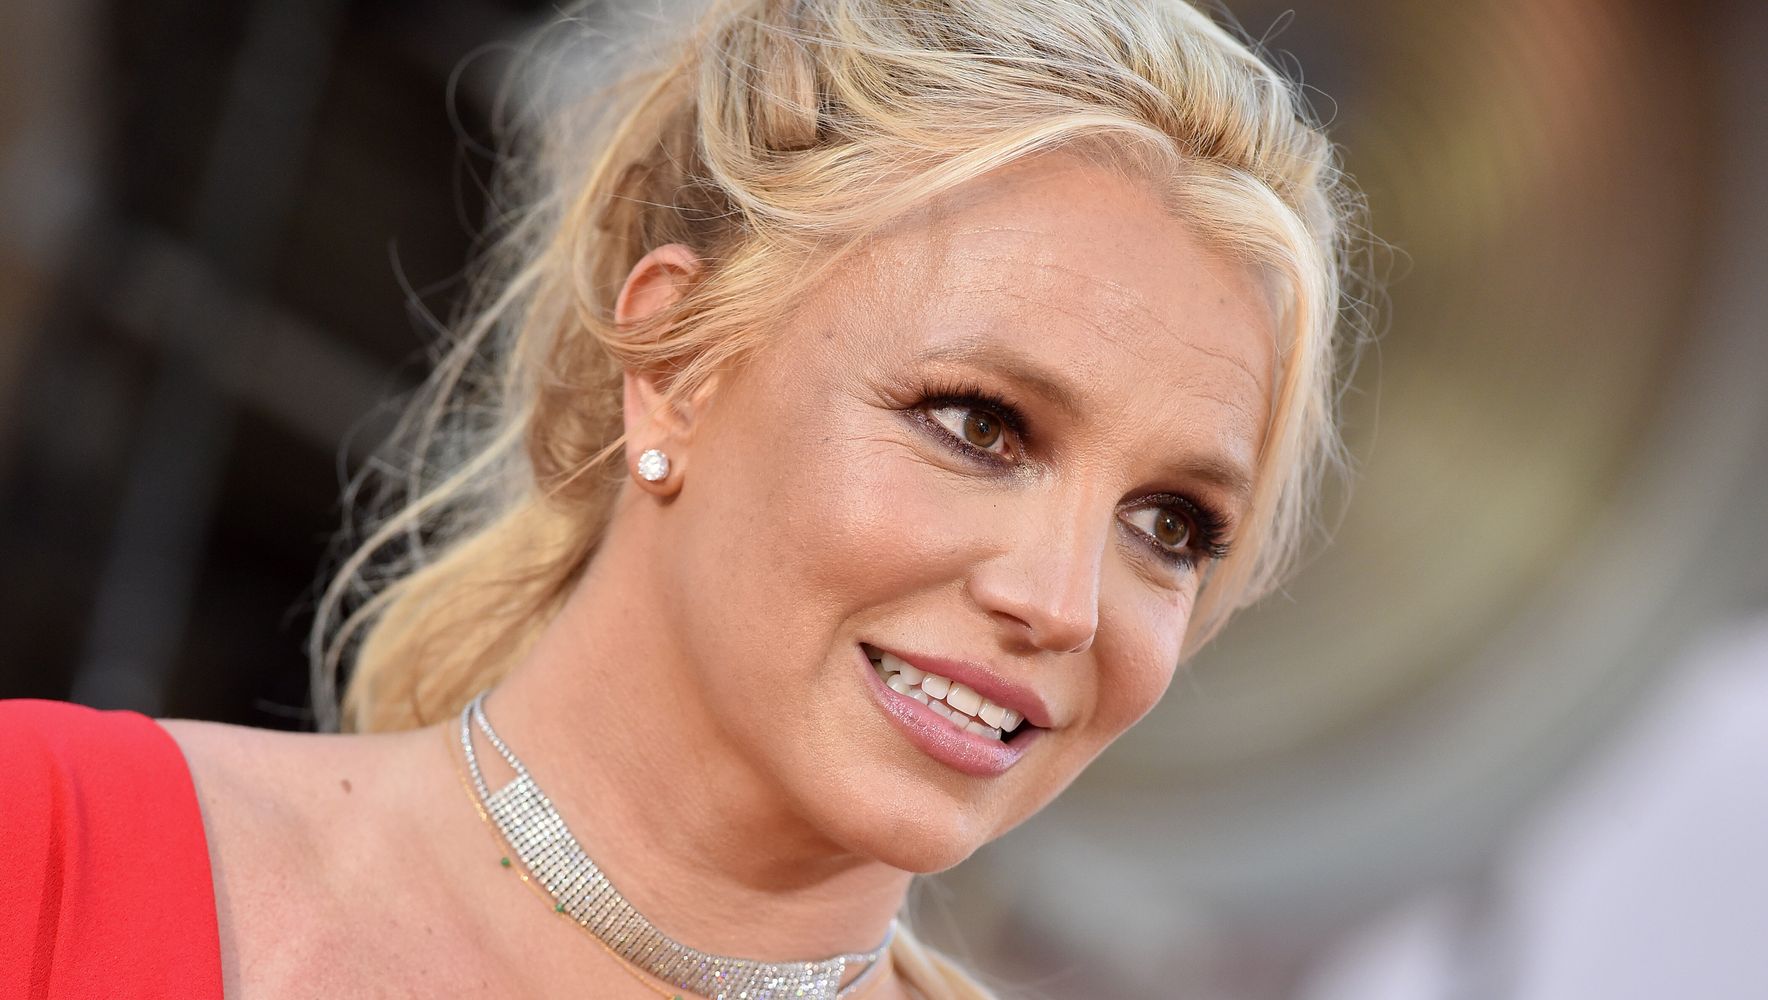 5 Alarming Claims From Britney Spears’ Testimony, Including Forced IUD Use